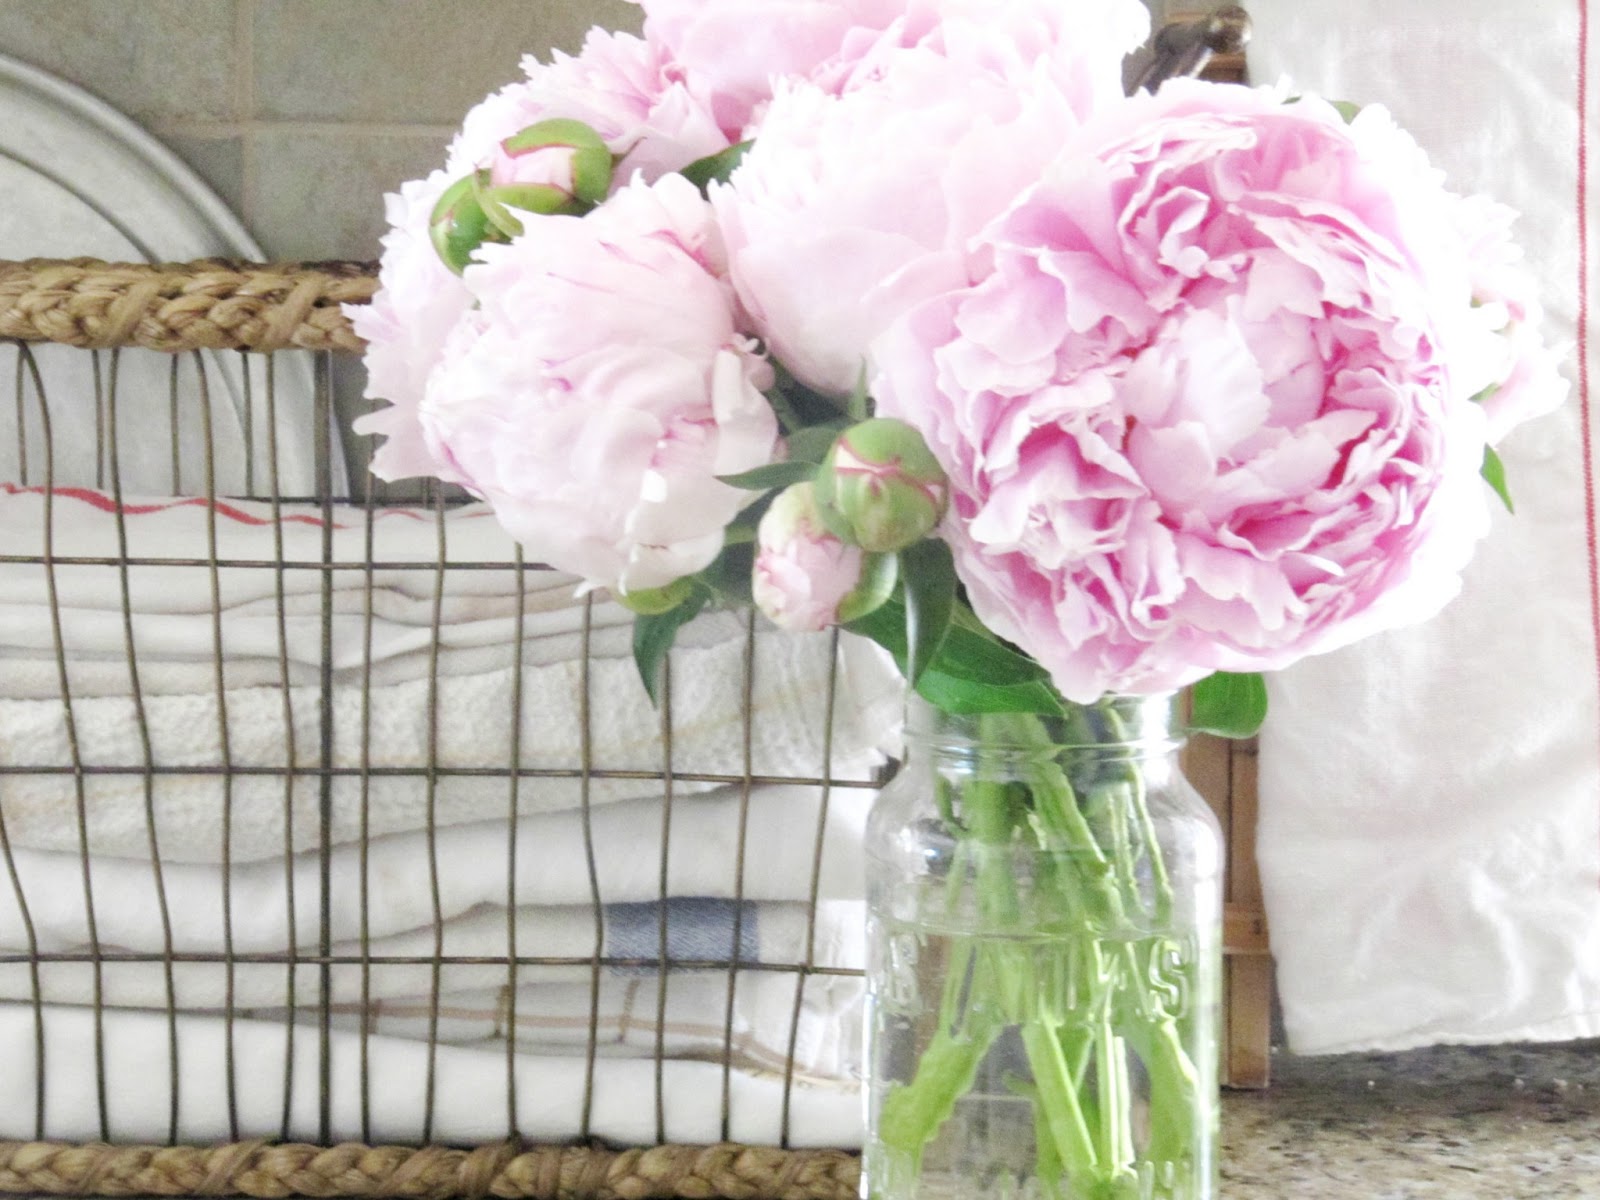 Peonies and a Basket full of towels